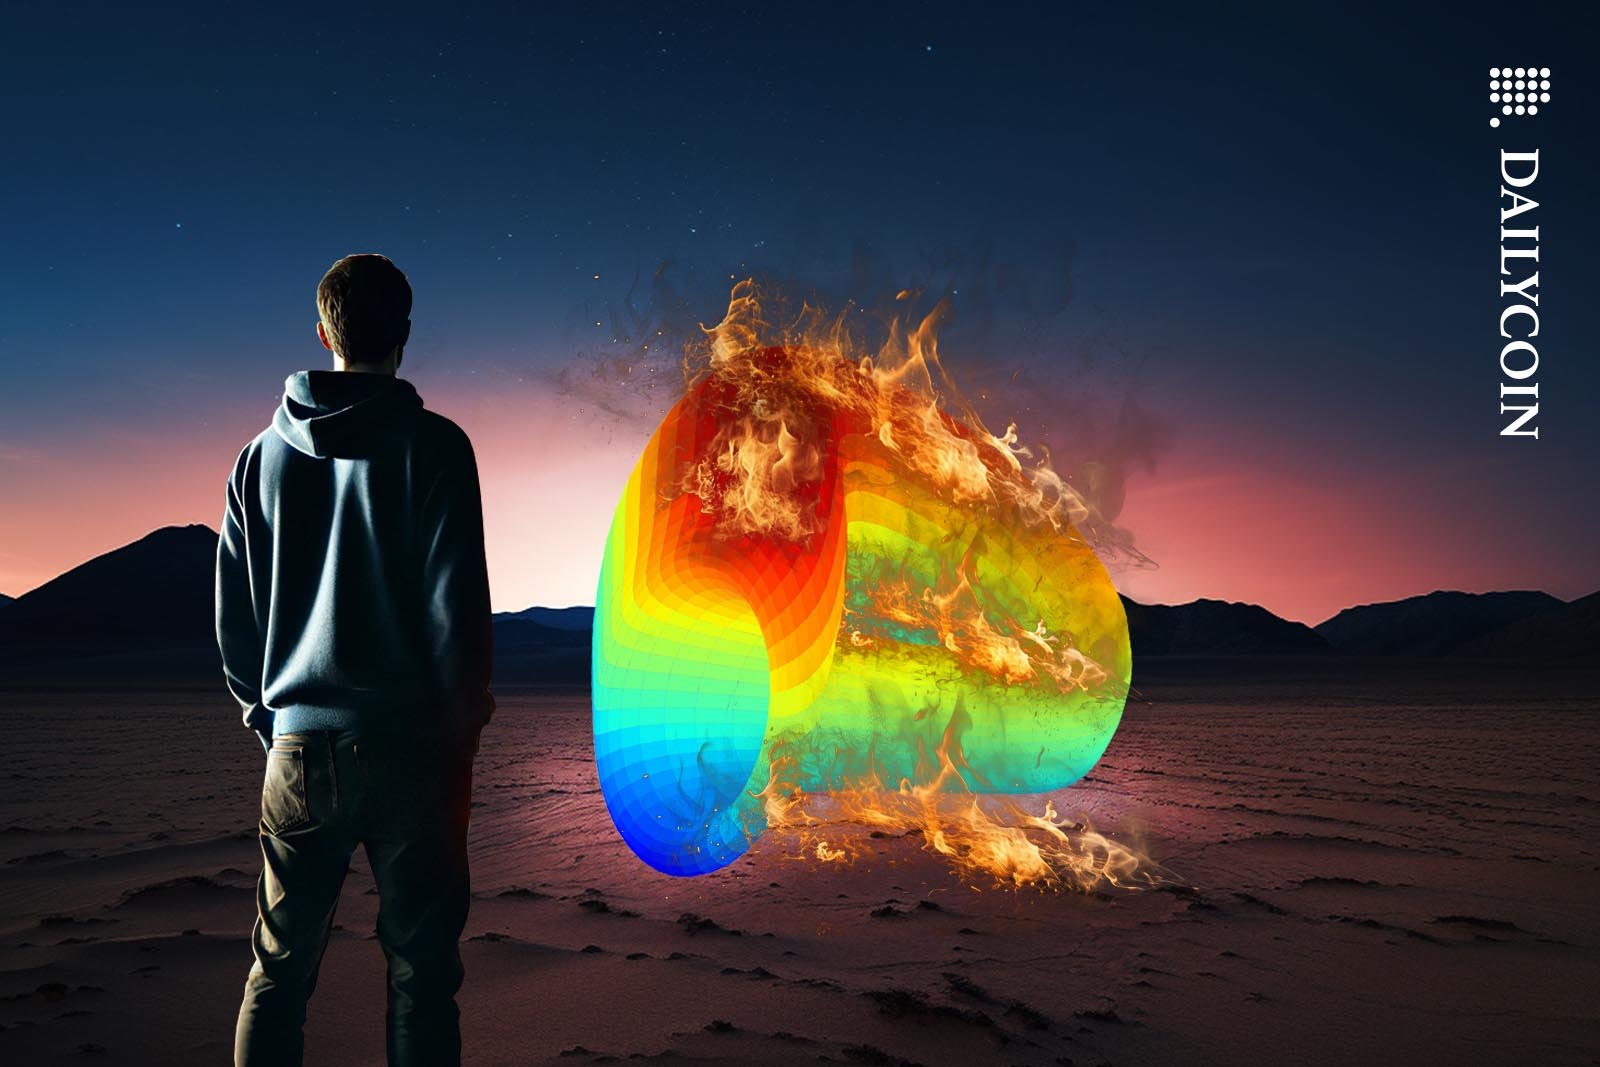 A man watching a huge CurveDao logo burn in a desert at night.